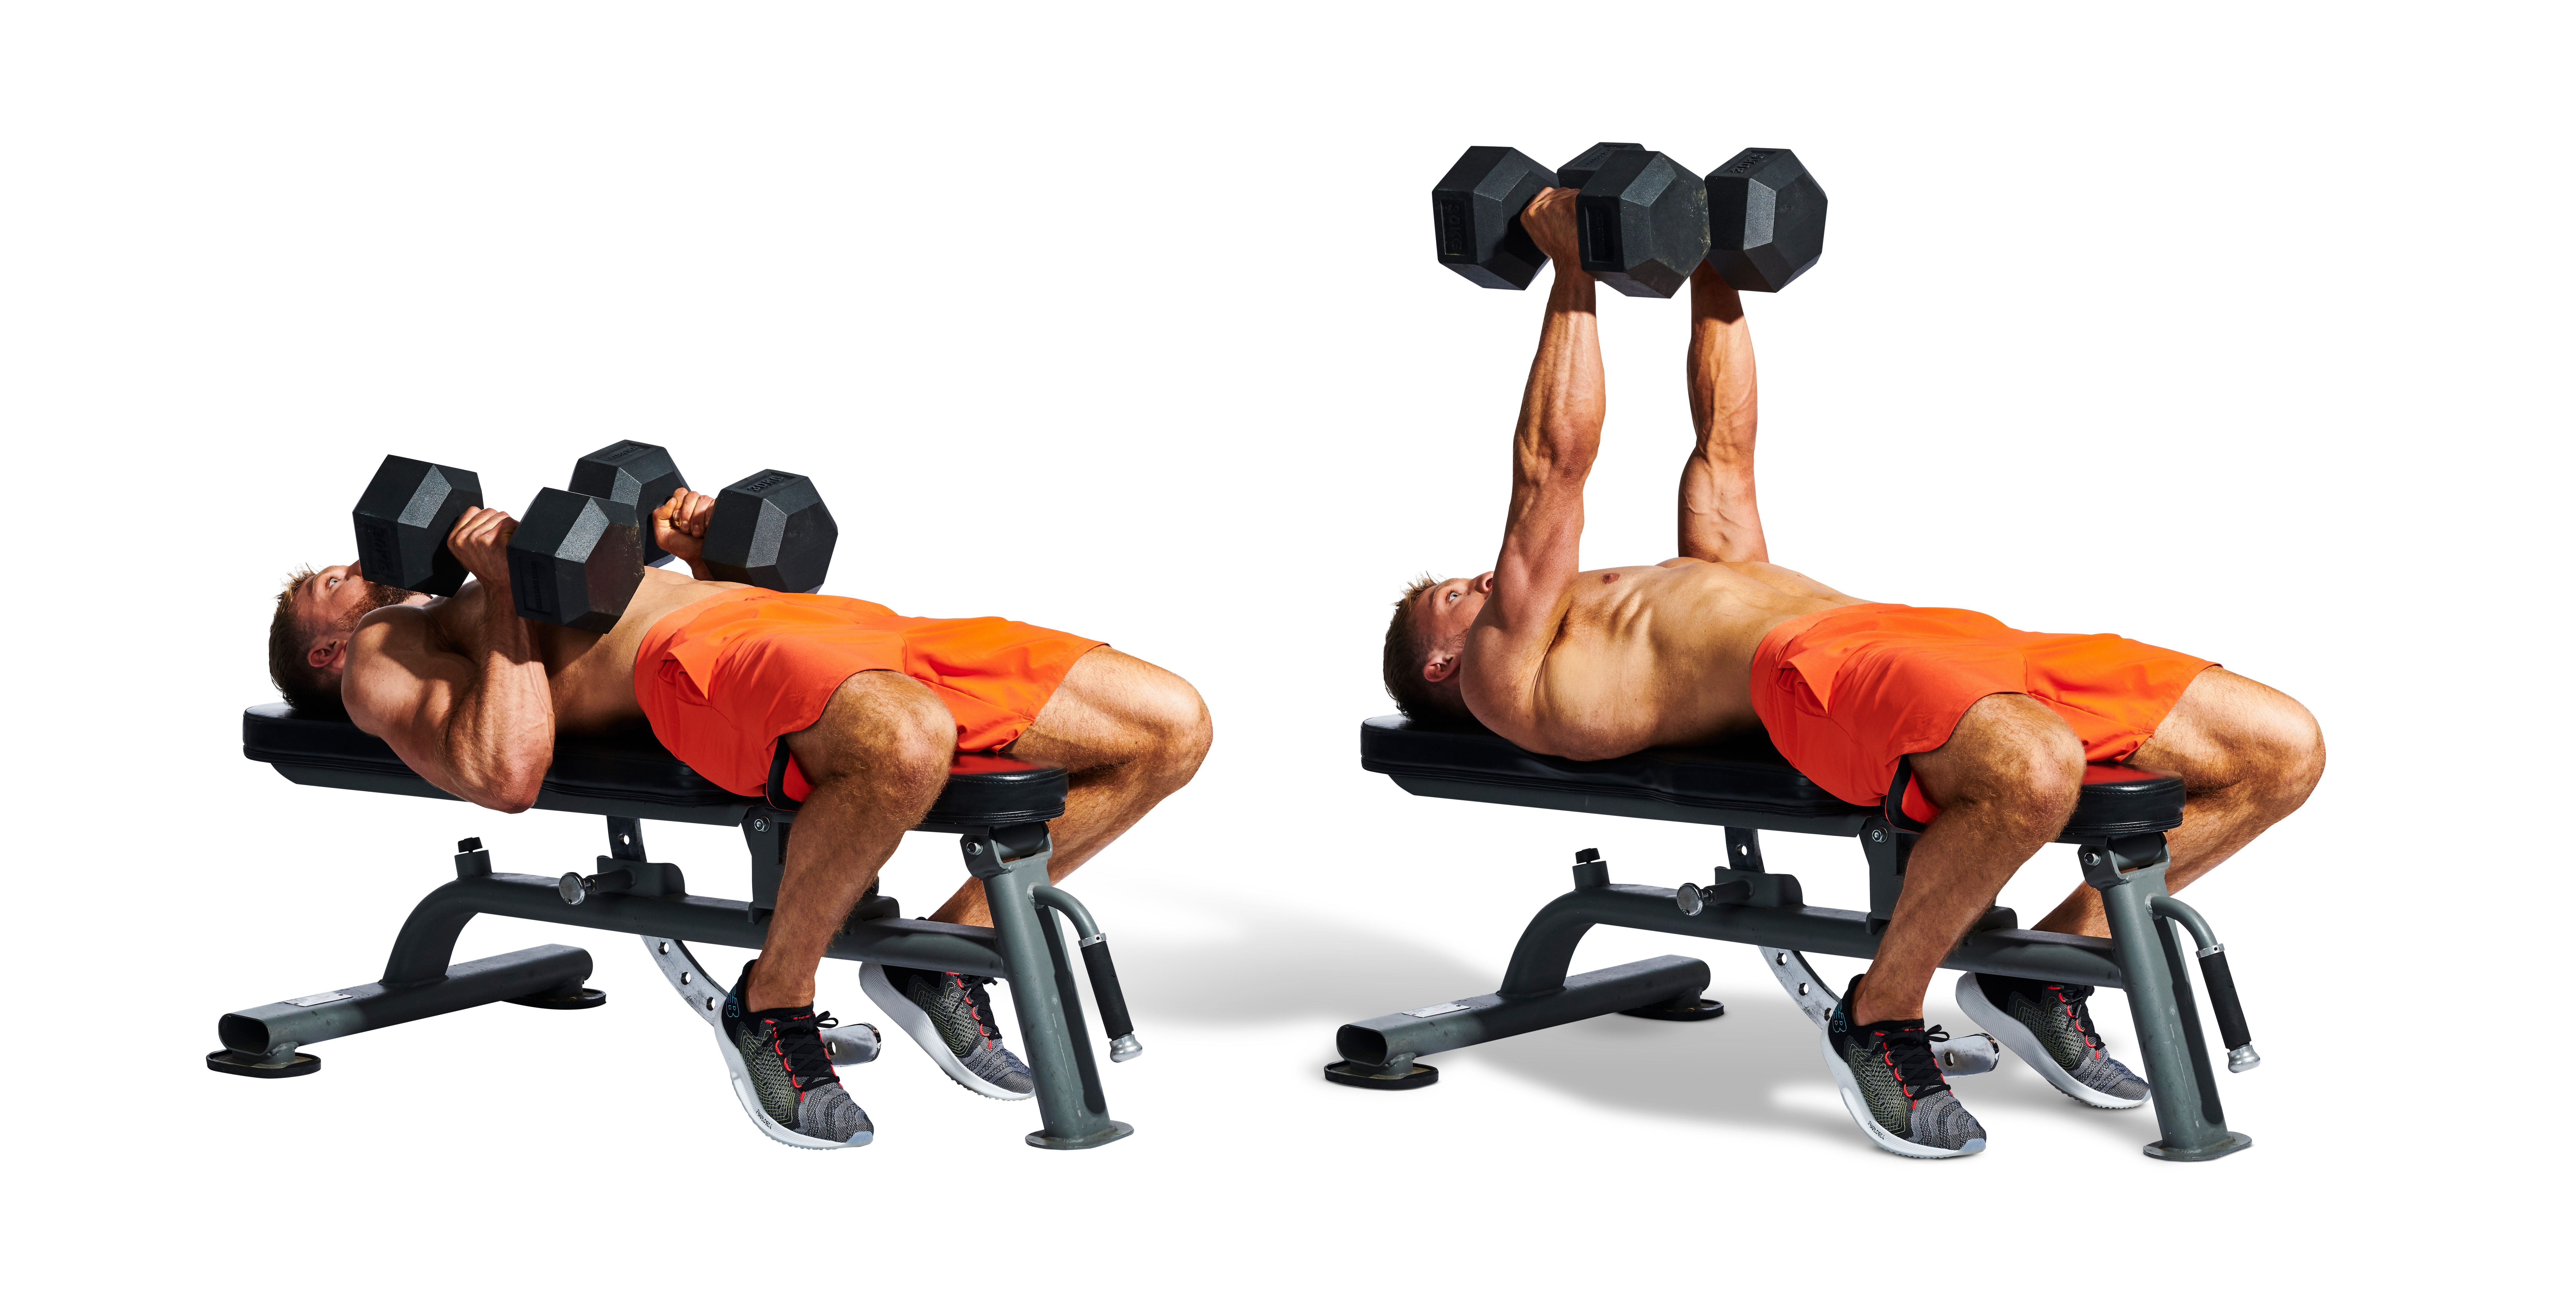 5 Best Bench Press Alternative Exercises For a Massive Chest Pump